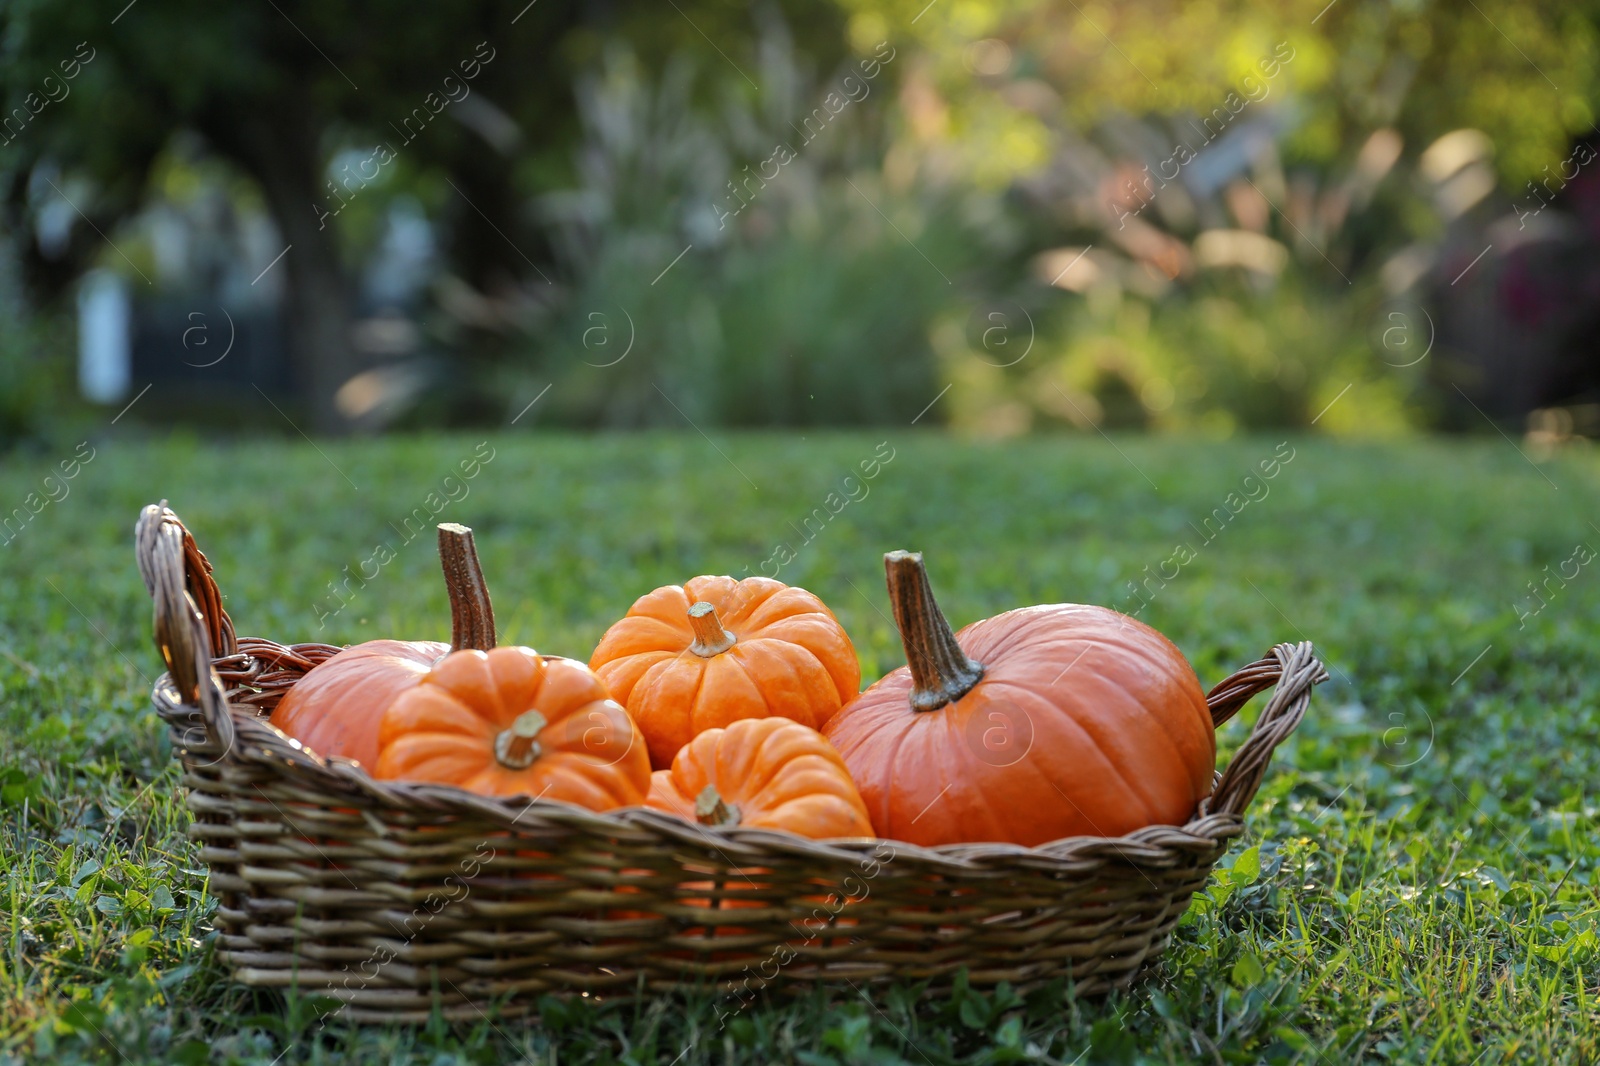 Photo of Wicker basket with whole ripe pumpkins on green grass outdoors